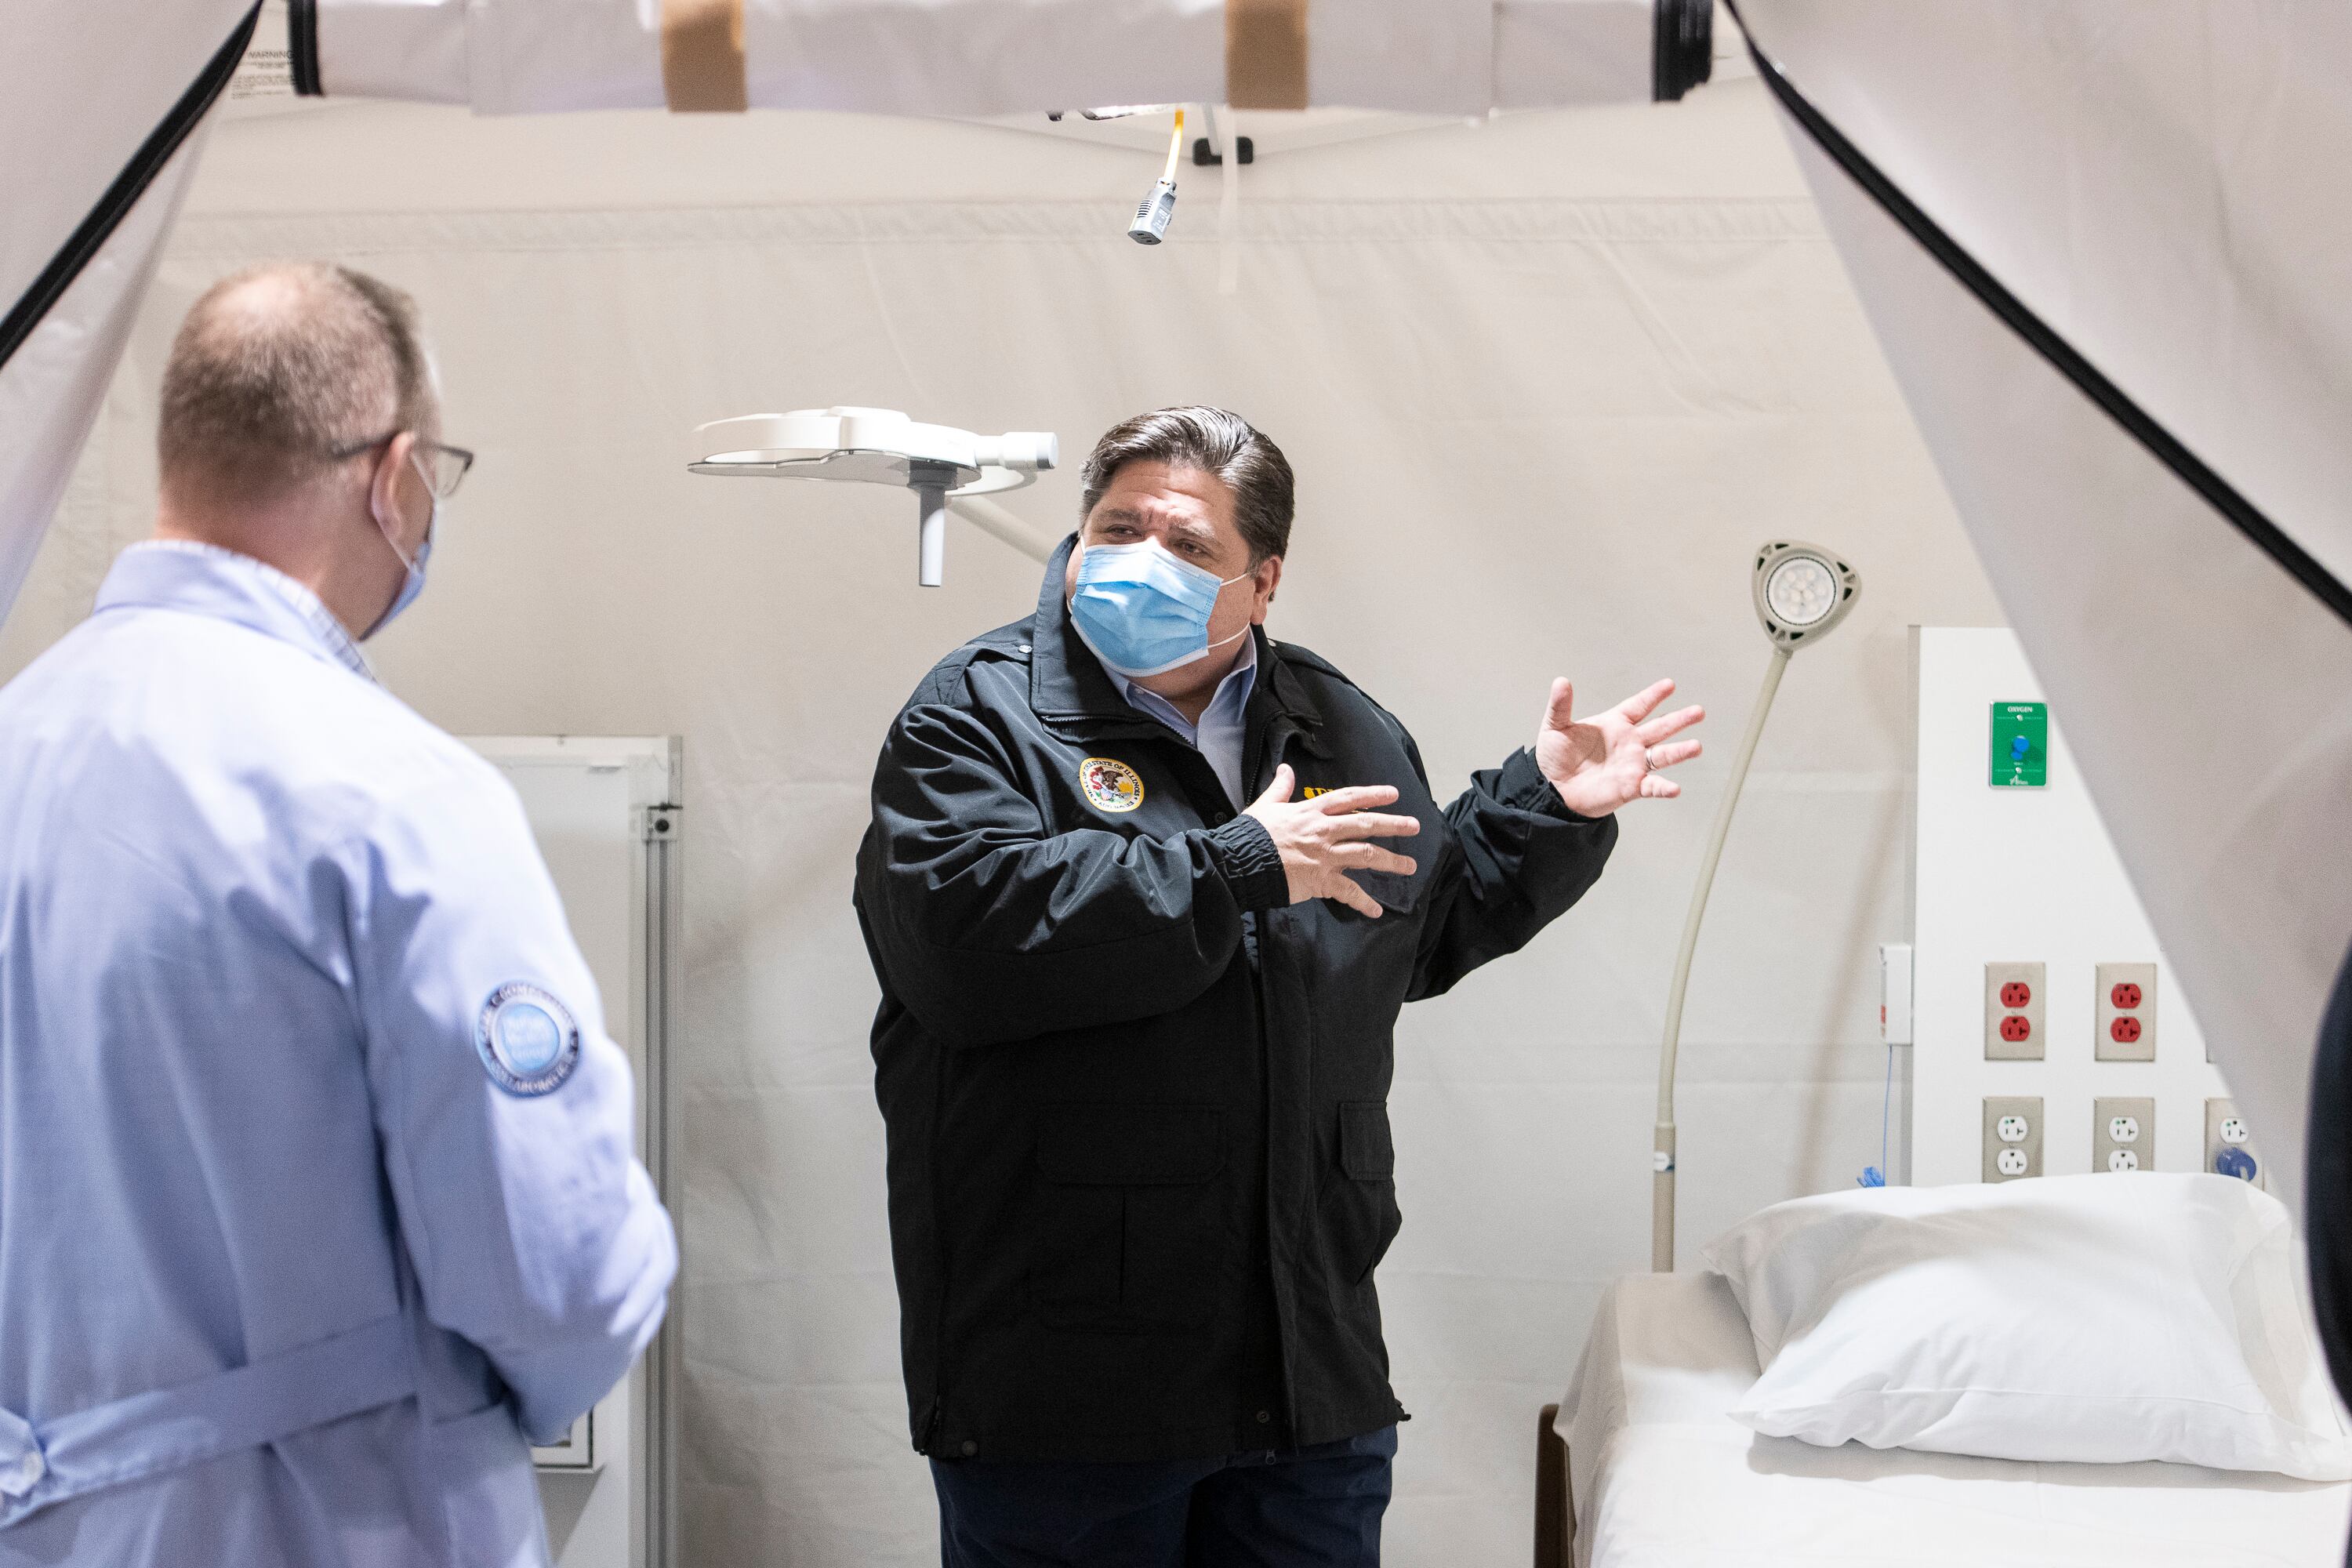 Governor J.B. Pritzker, wearing a windbreaker and a blue mask, speaks with health care worker in a white COVID treatment room.